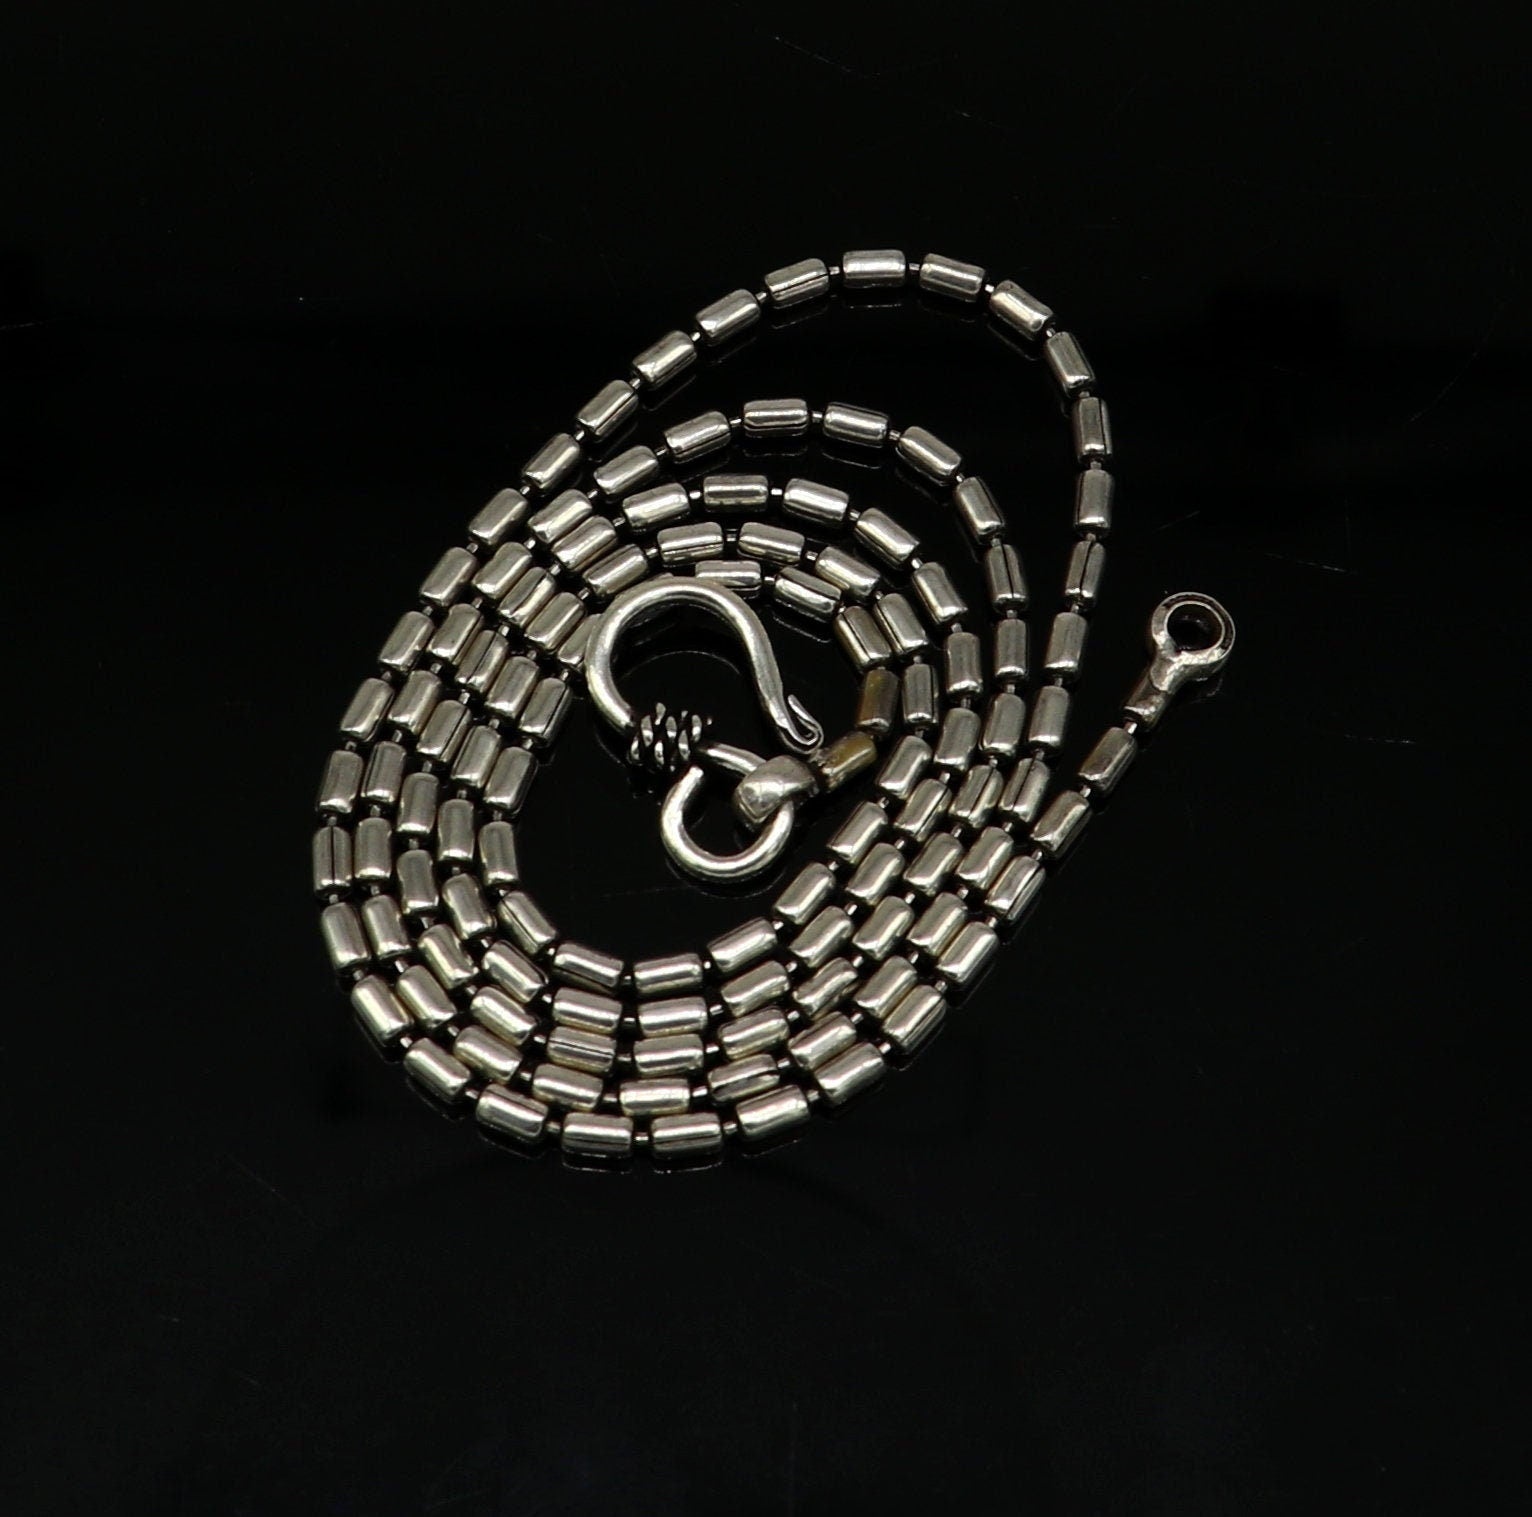 All size 925 sterling silver handmade customized fancy stylish silver beaded chain necklace baht chain best gifting jewelry from India nch45 - TRIBAL ORNAMENTS